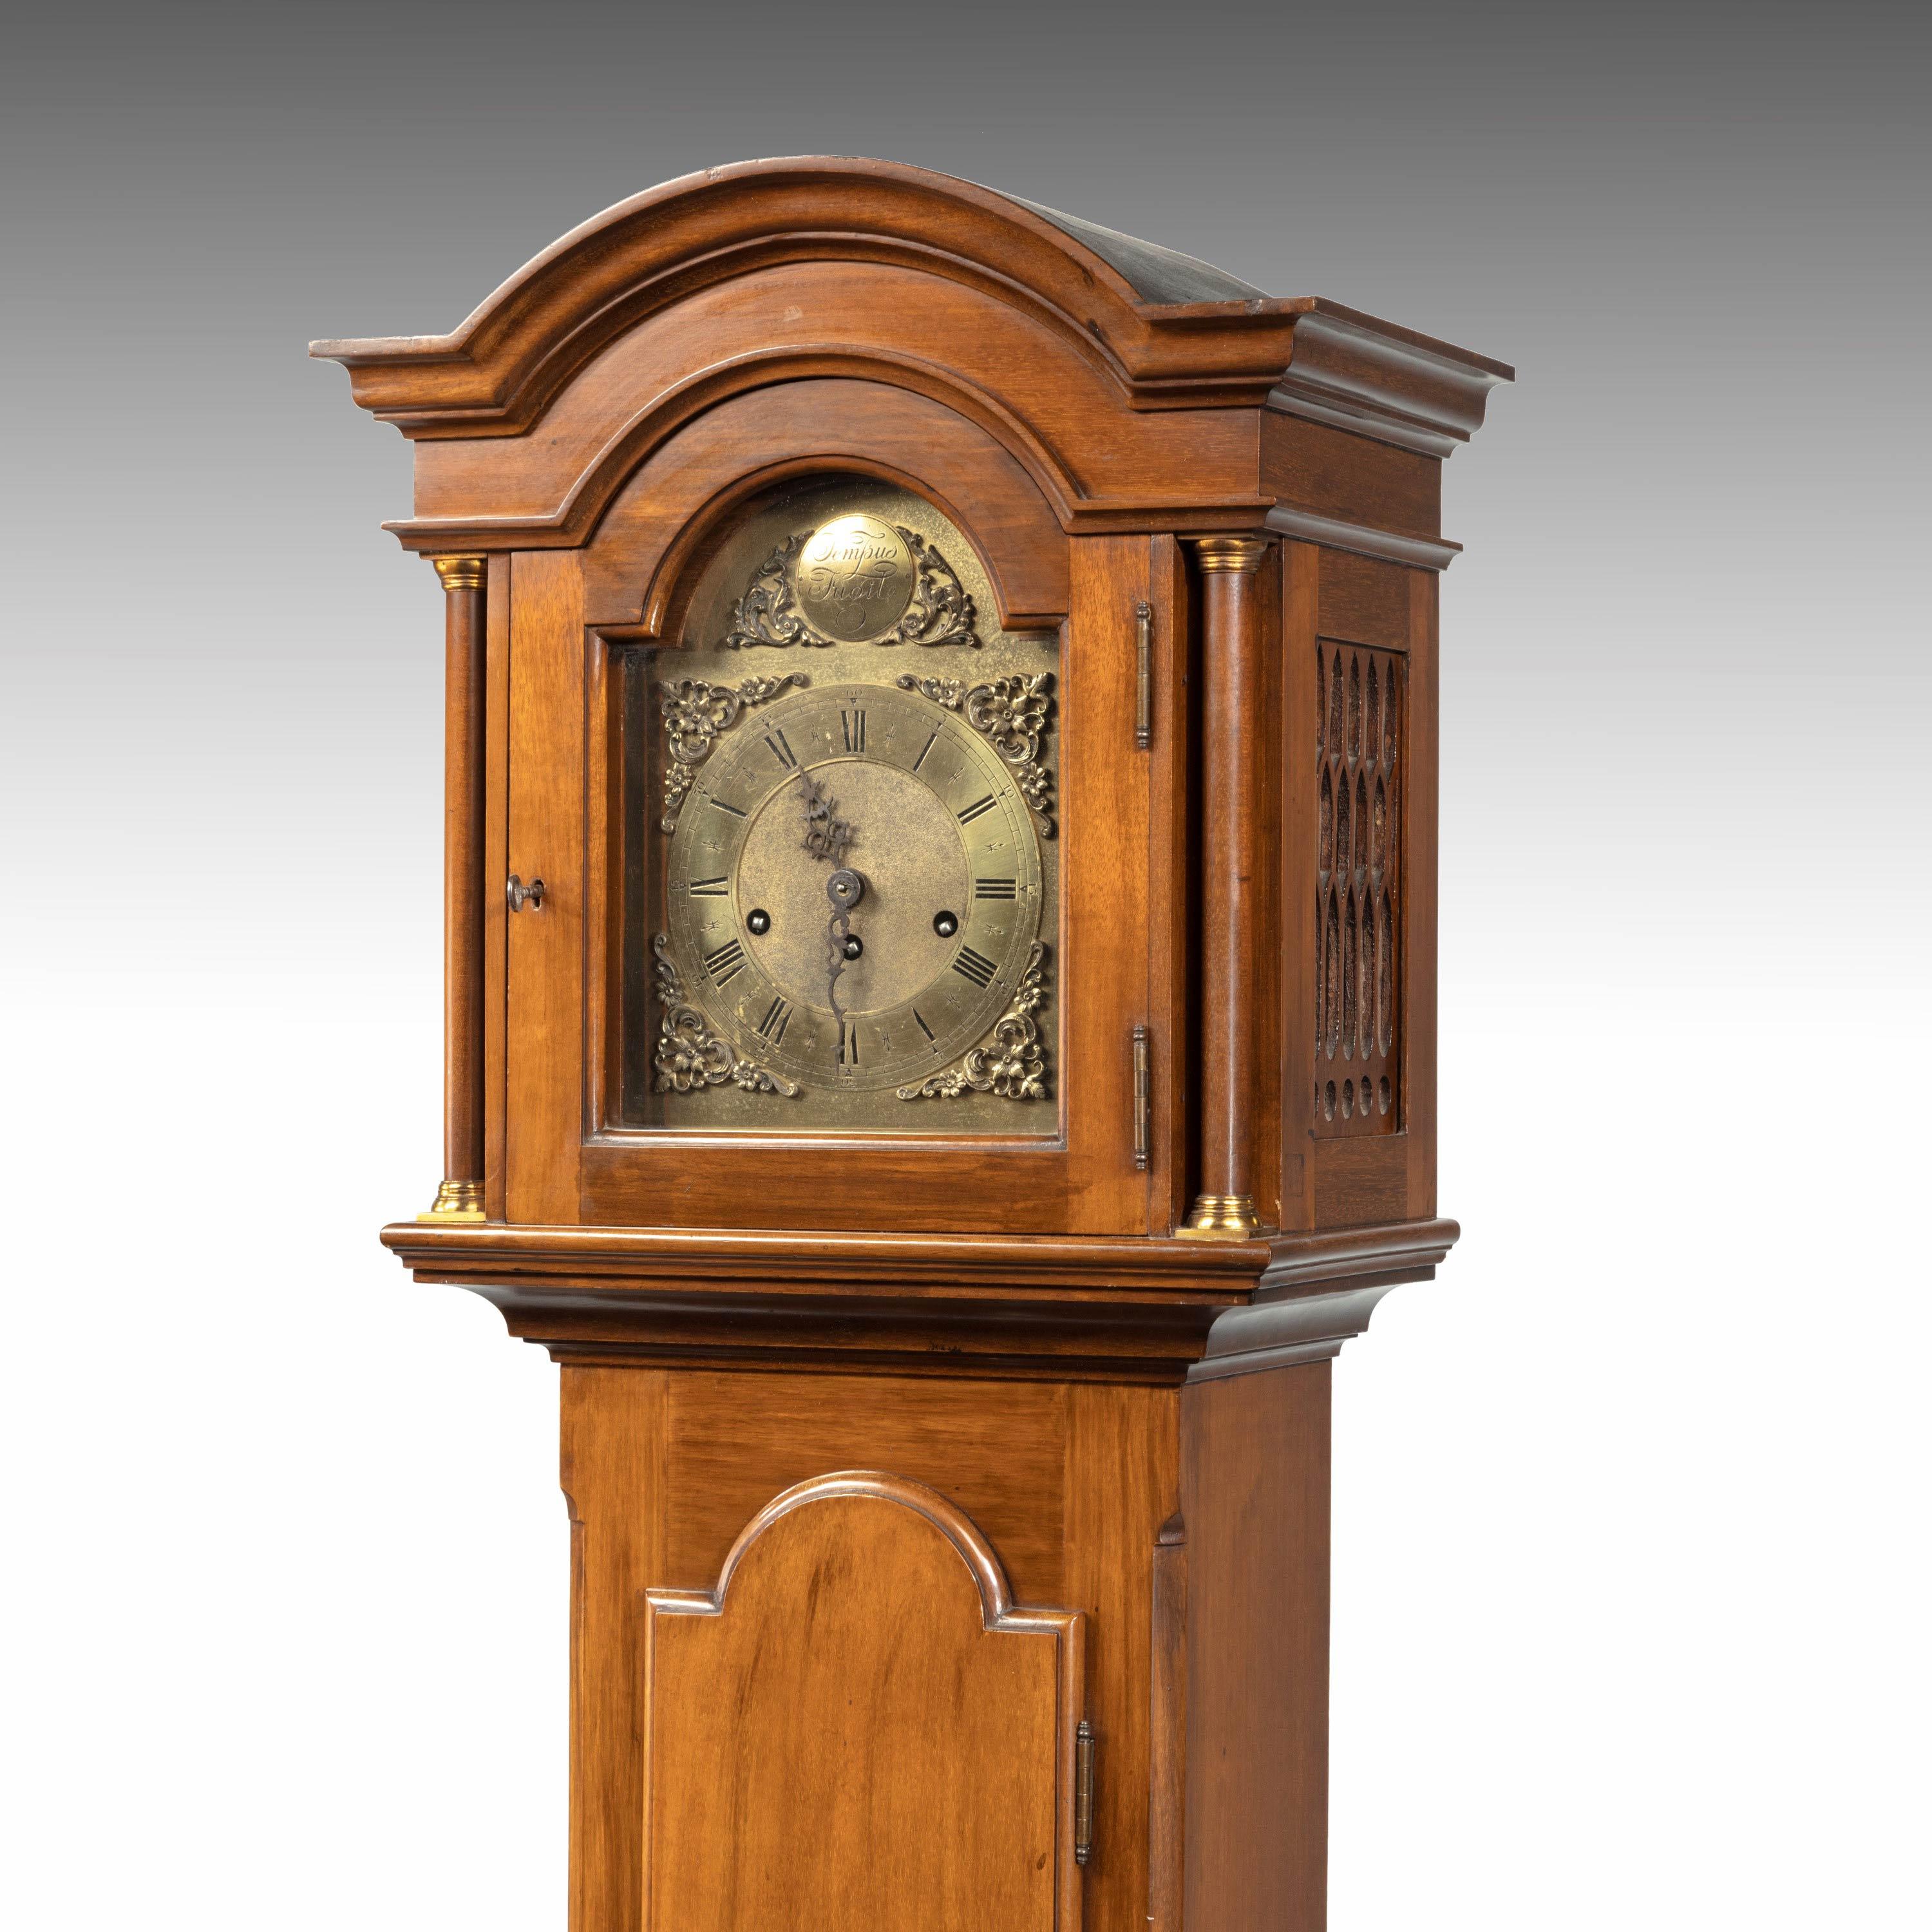 A most attractive early 20the century walnut grandmother clock. With a domed hood above an arched brass dial with both Roman and Arabic numerals. Eight day three train movement chiming on five gongs. Excellent overall condition.
          